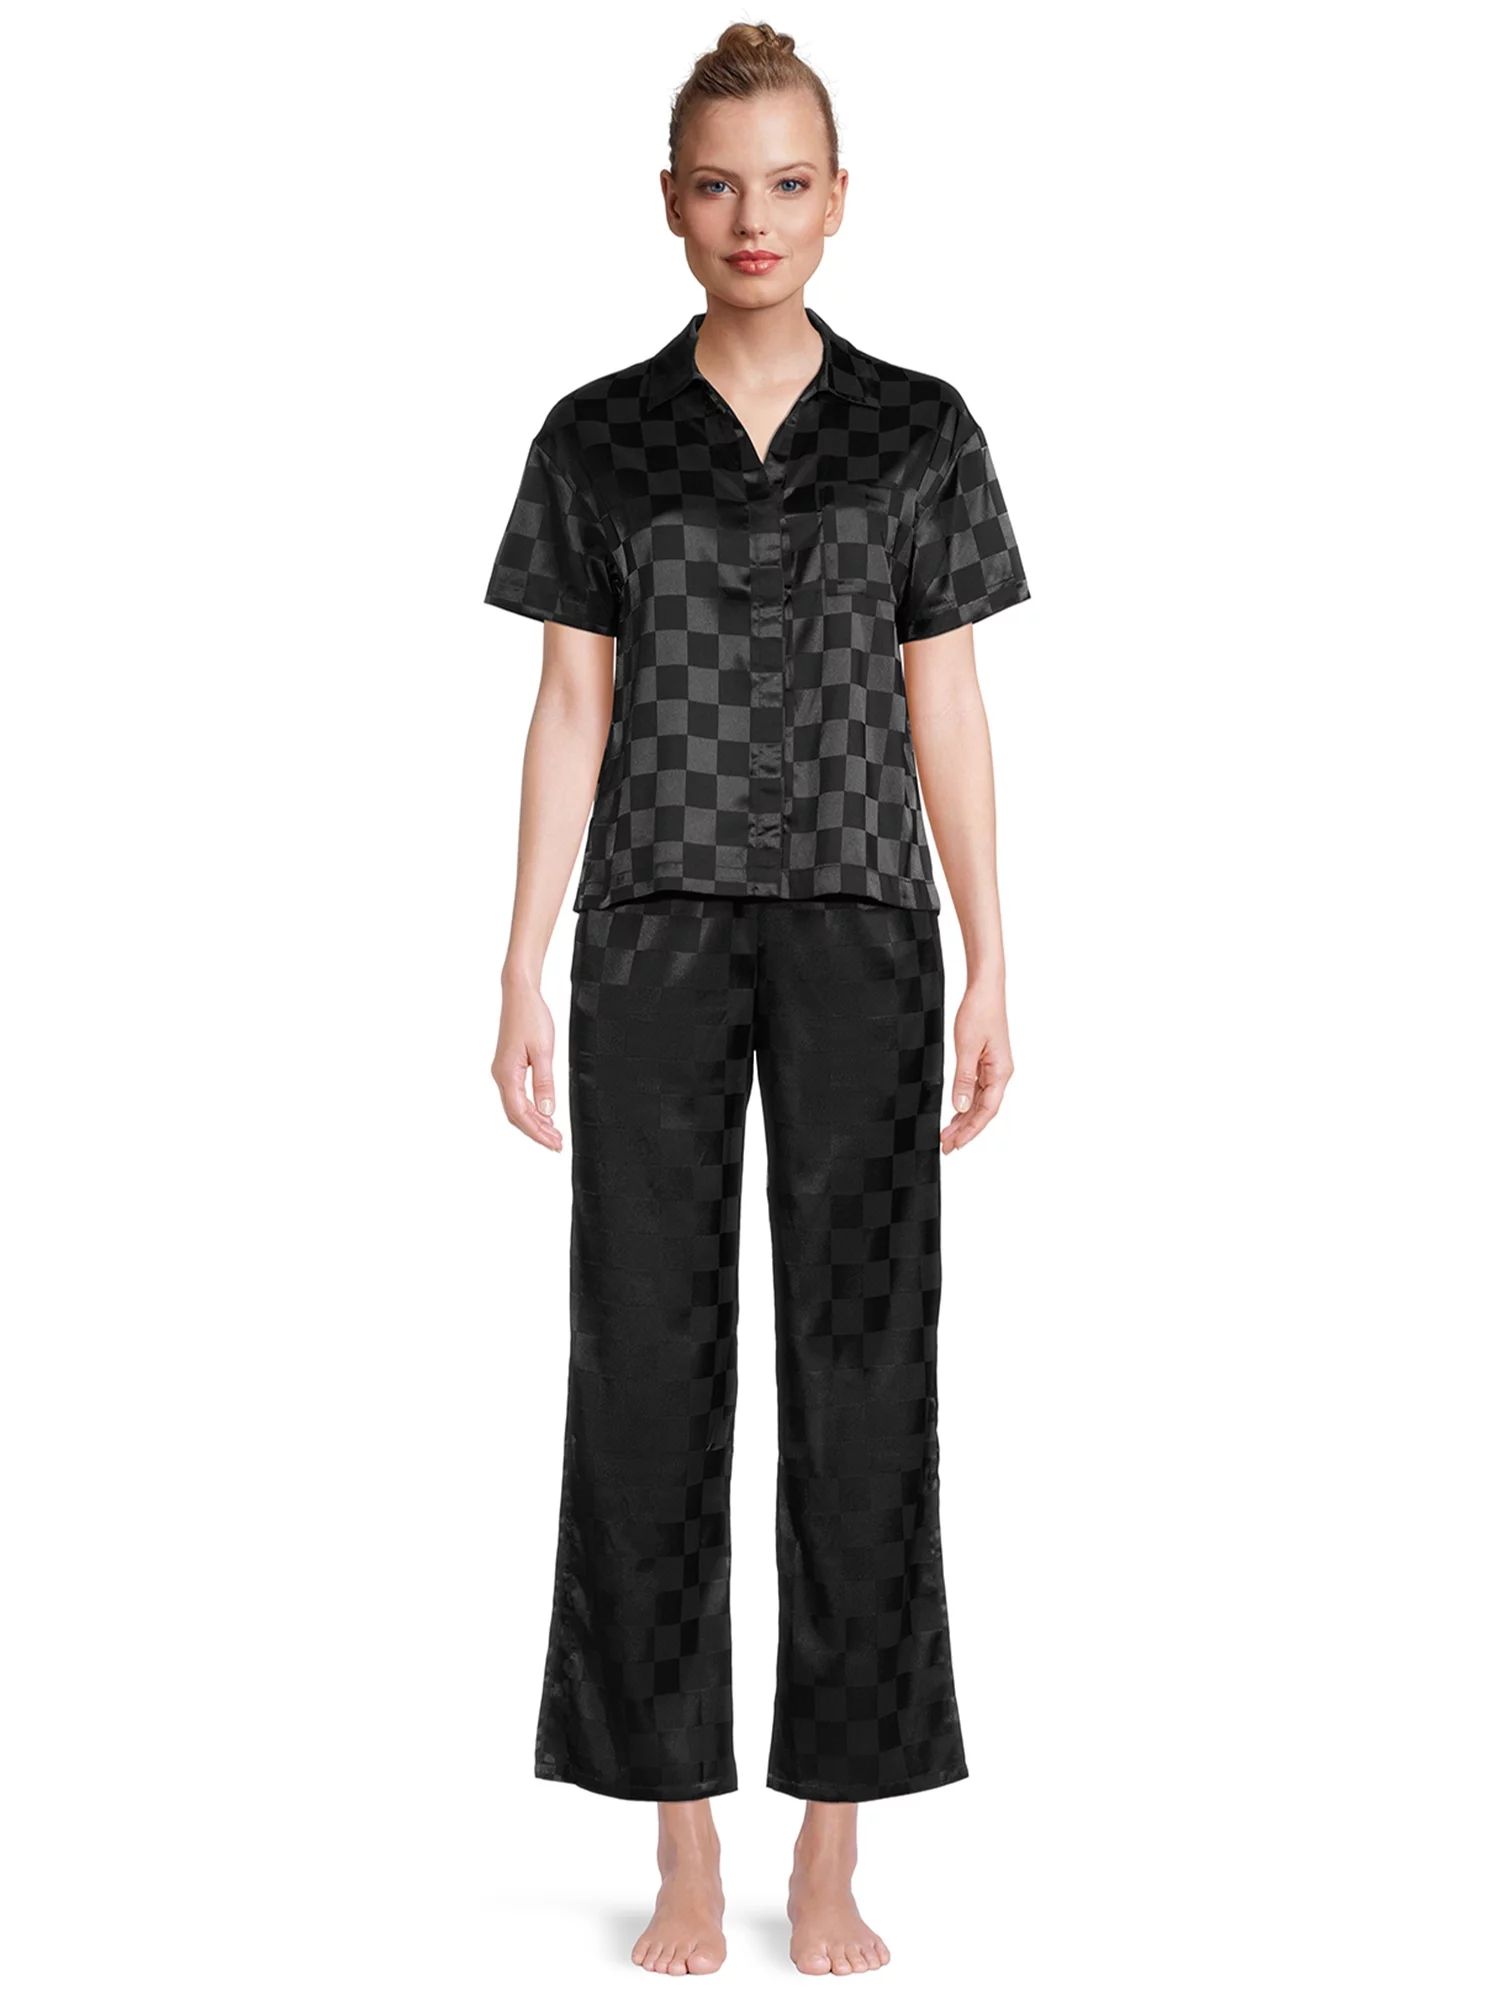 Lissome Women's and Women's Plus Satin Checkered Boxy Crop Top and Pants Sleep Set, 2-Piece | Walmart (US)